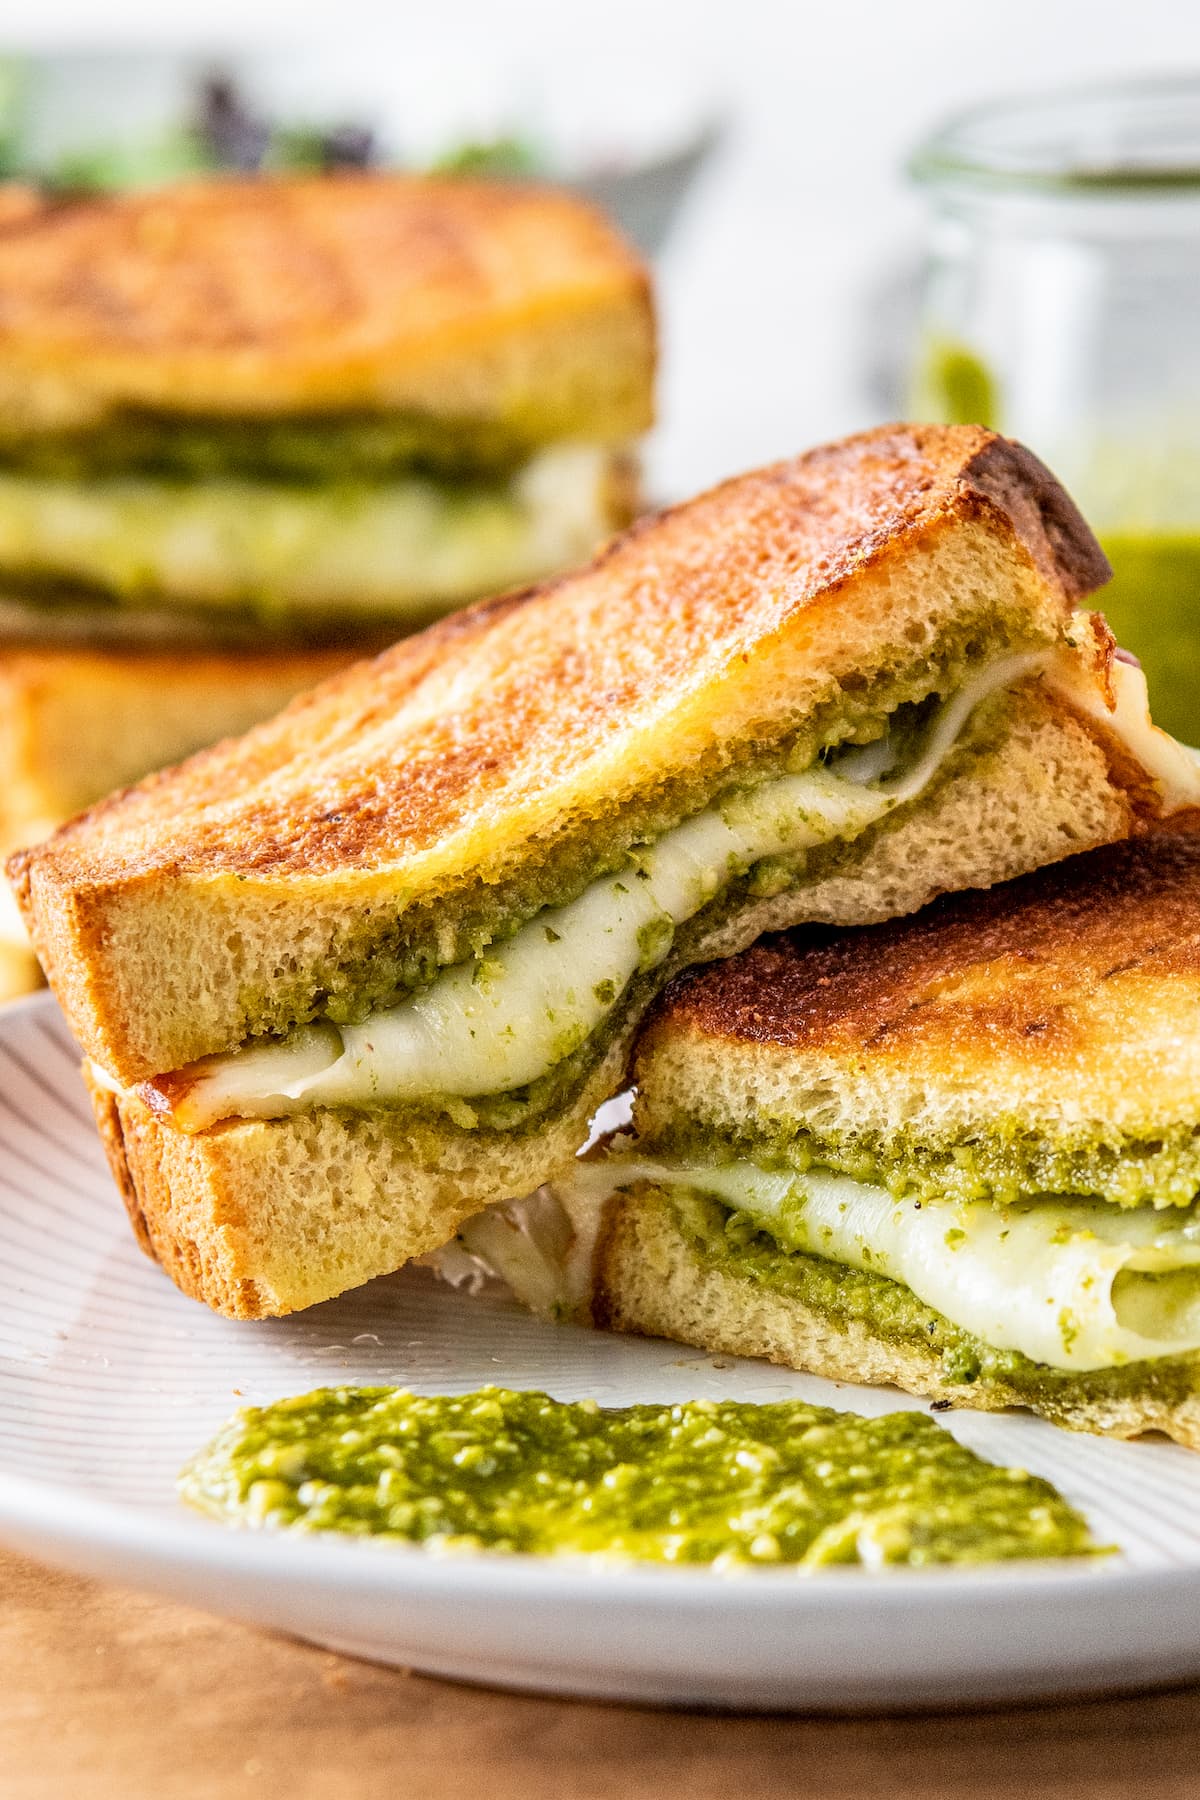 Open-faced grilled cheese sandwich with pesto